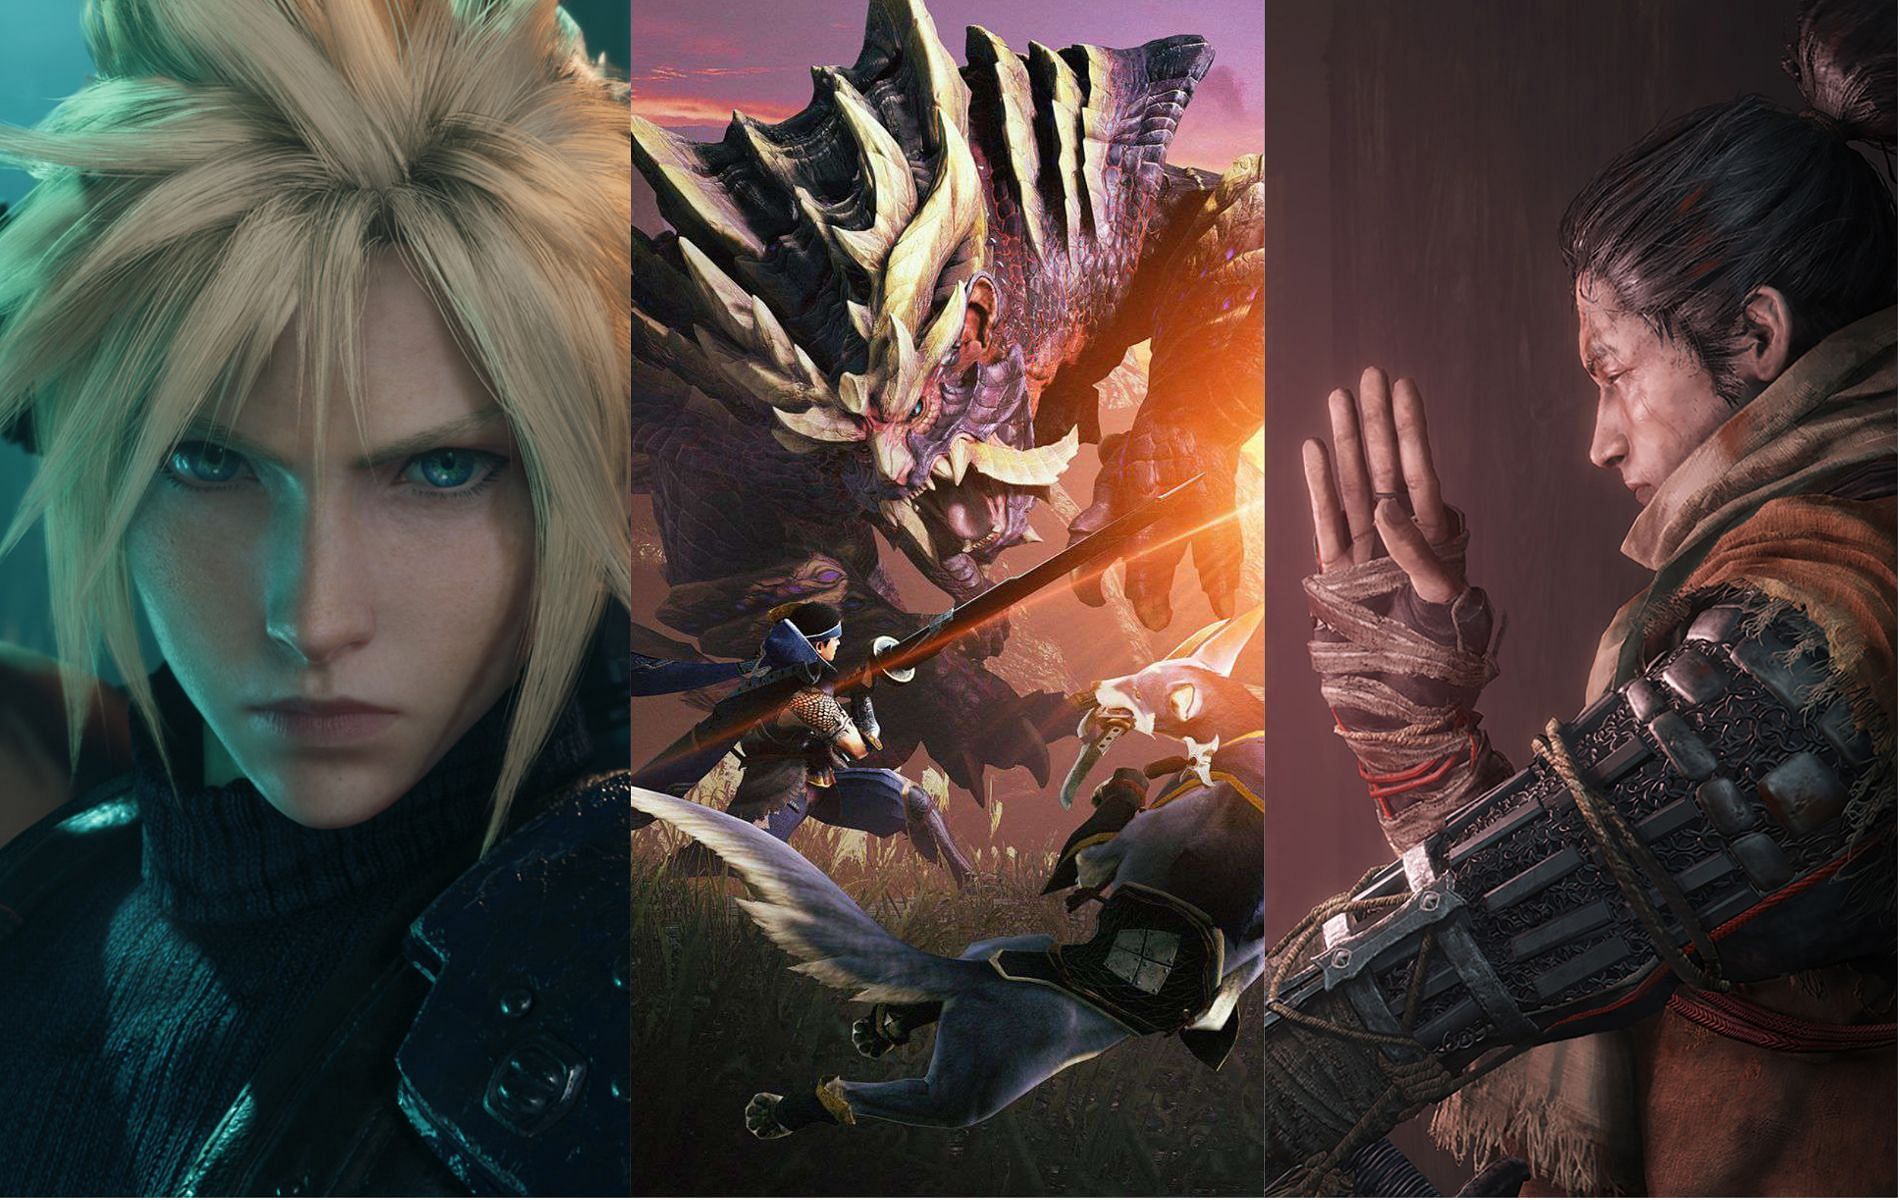 Final Fantasy 7 and Sekiro are some of the best games that players tired of grinding in Monster Hunter titles must try (Image via Square Enix, Capcom, FromSoftware, Steam)